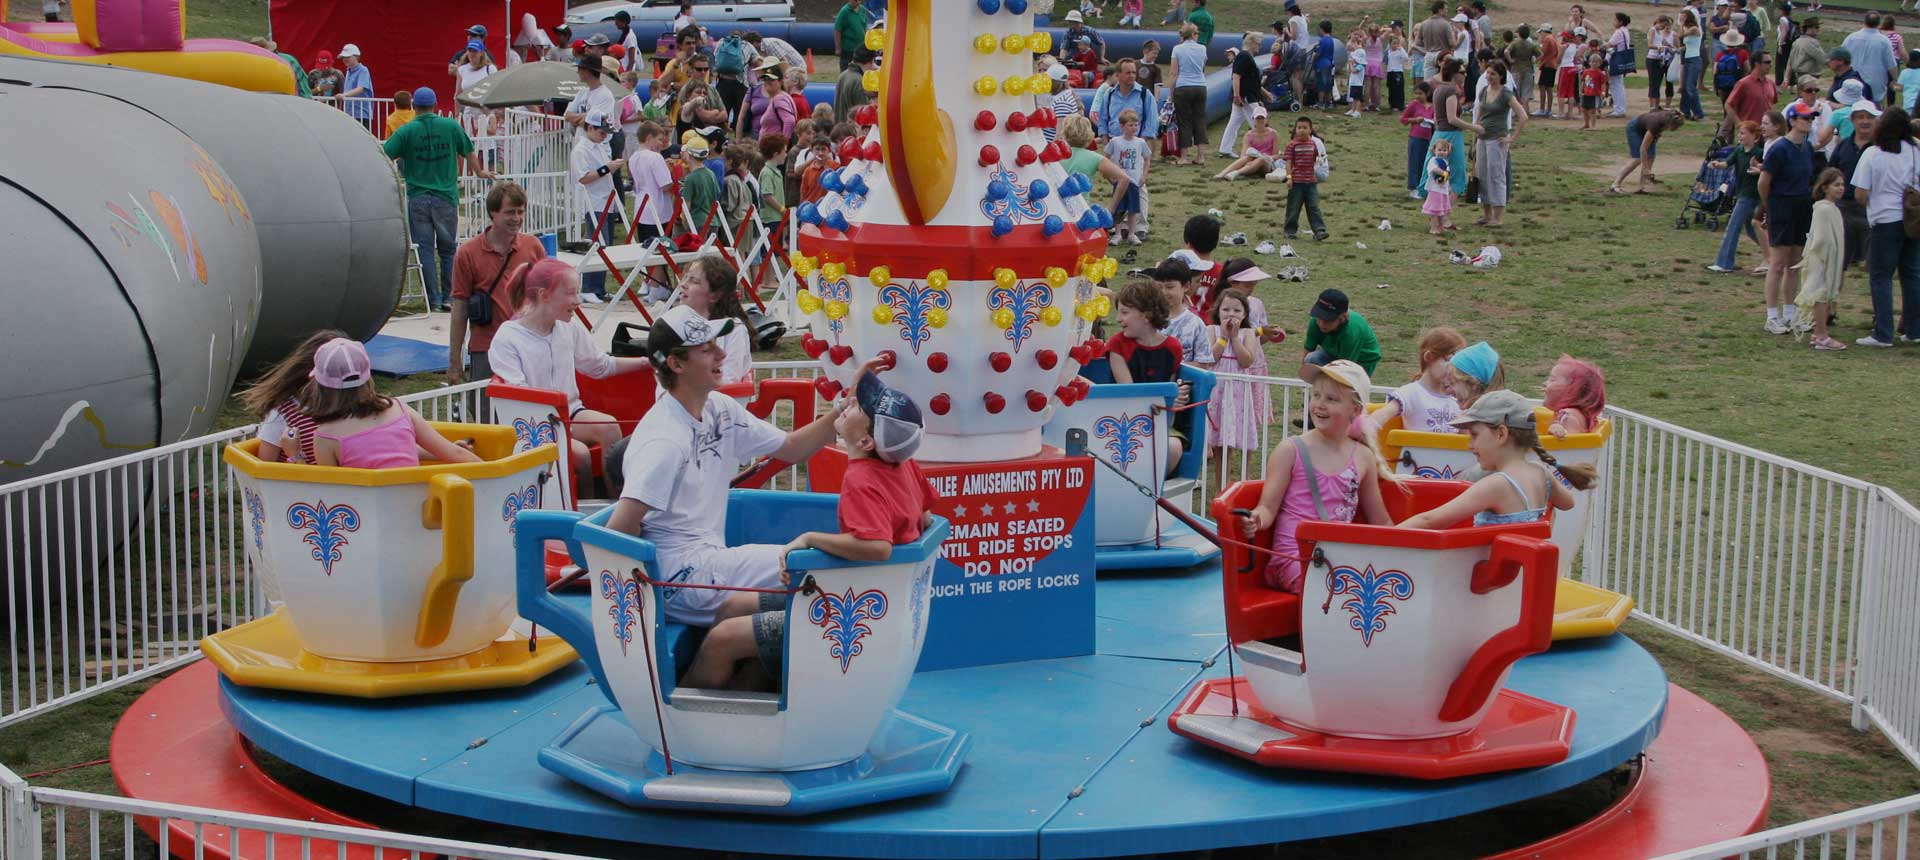 Jubilee Entertainment Cup & Saucer Ride for hire Brisbane